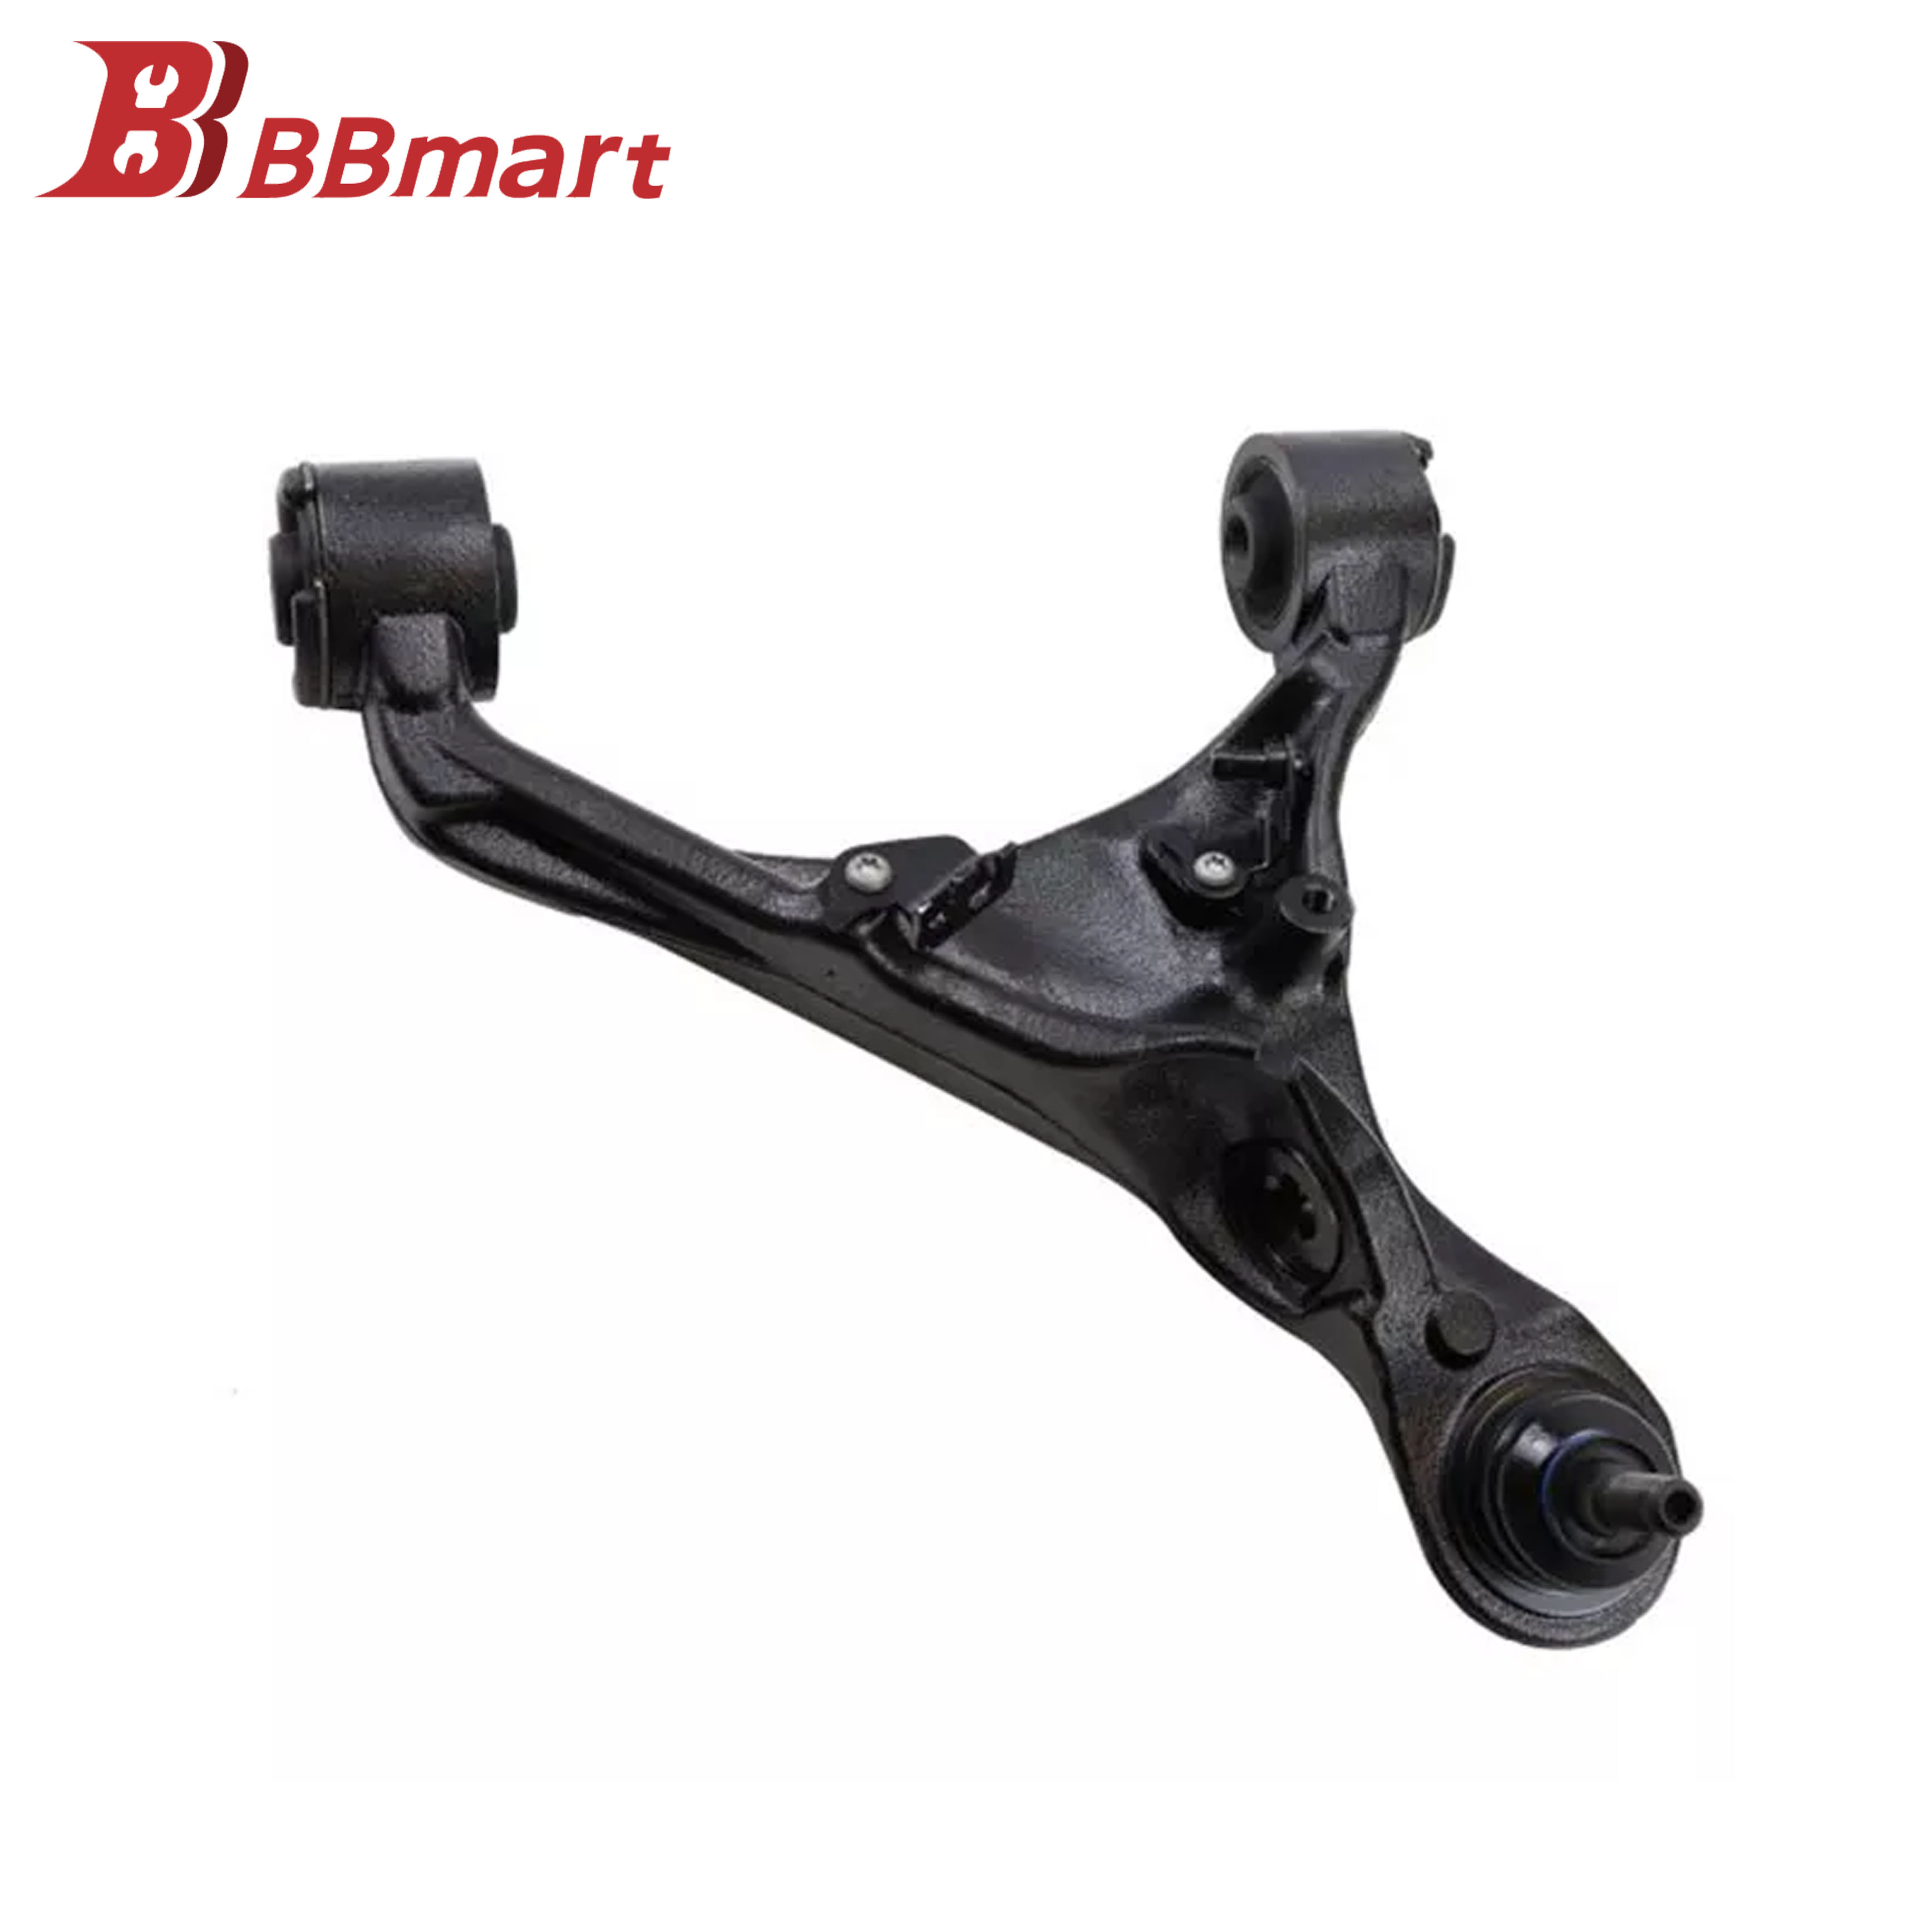 BBmart Auto Parts Front Upper Left Control Arm For Land Rover RANGE ROVER SPORT OE LR074838